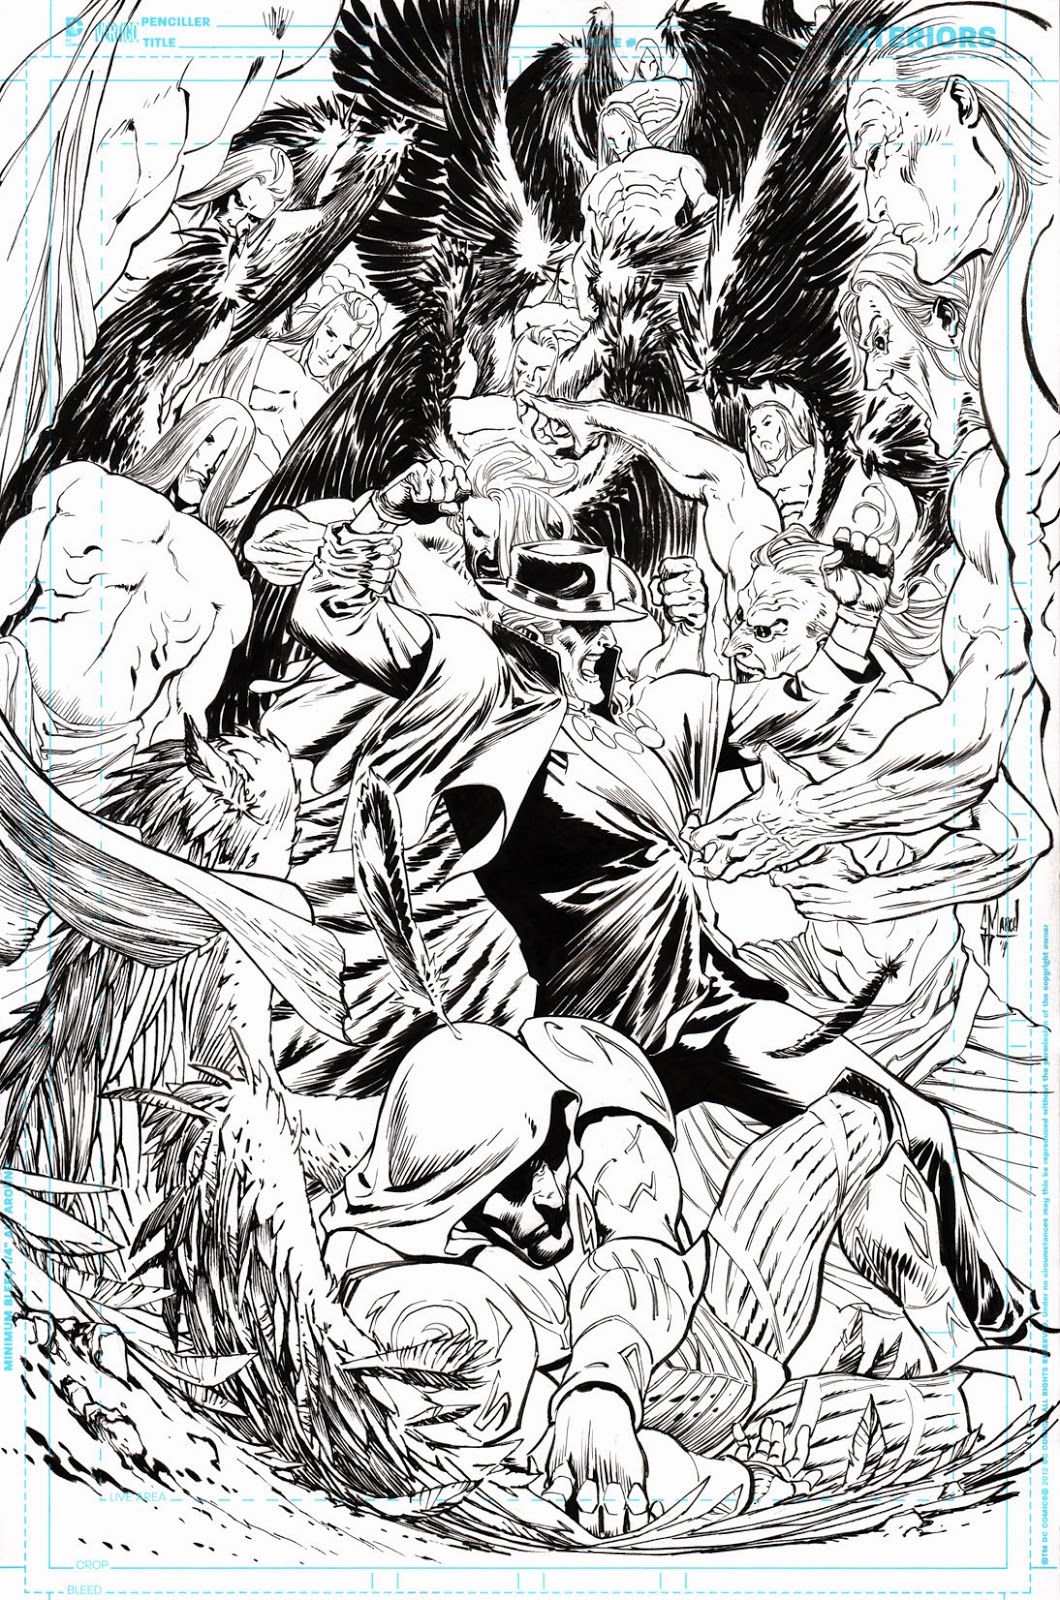 Making of a cover: PHANTOM STRANGER #21 by Guillem March